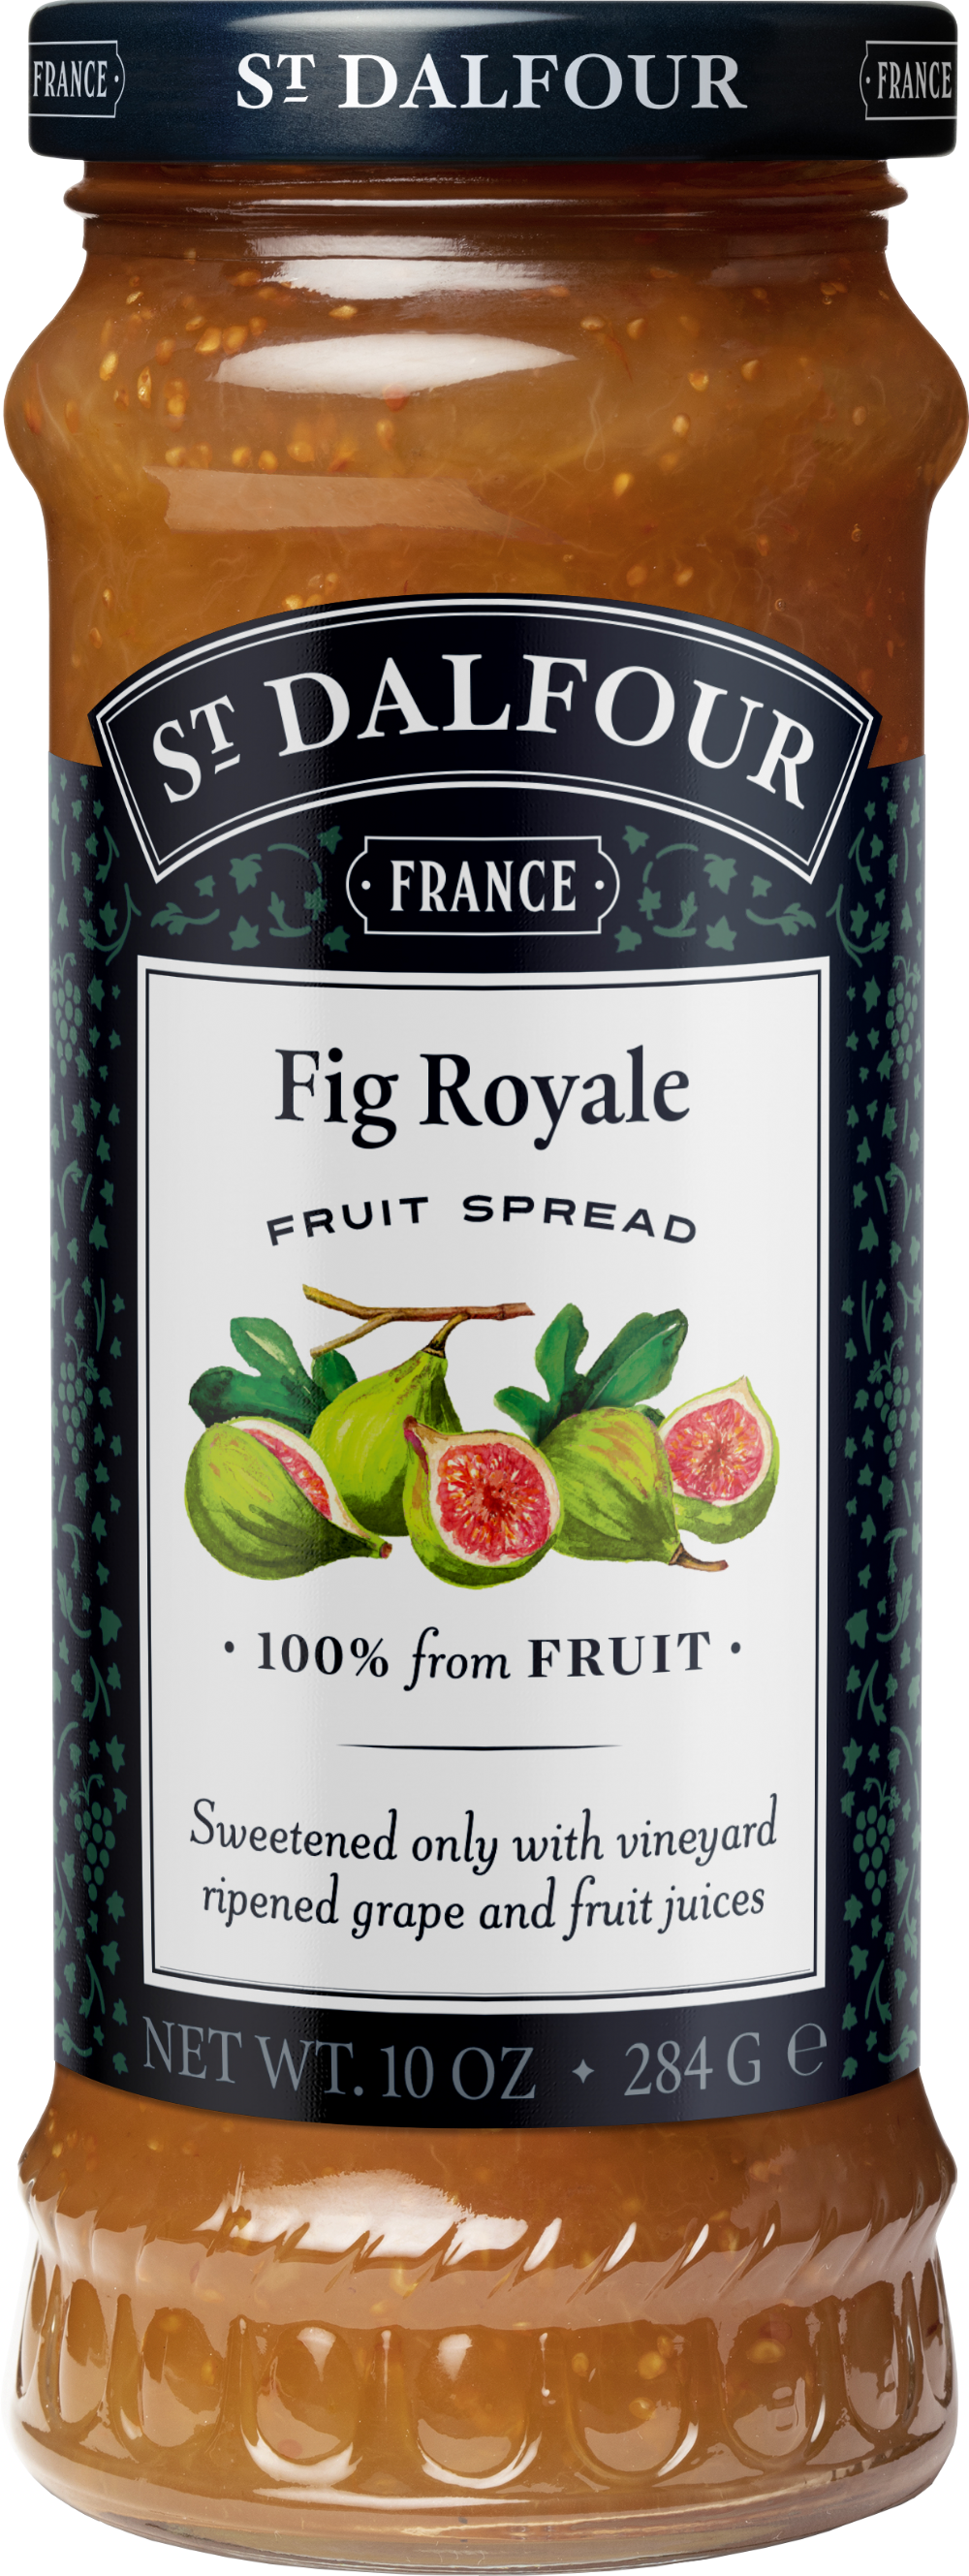 ST DALFOUR Fig Royale Fruit Spread 284g